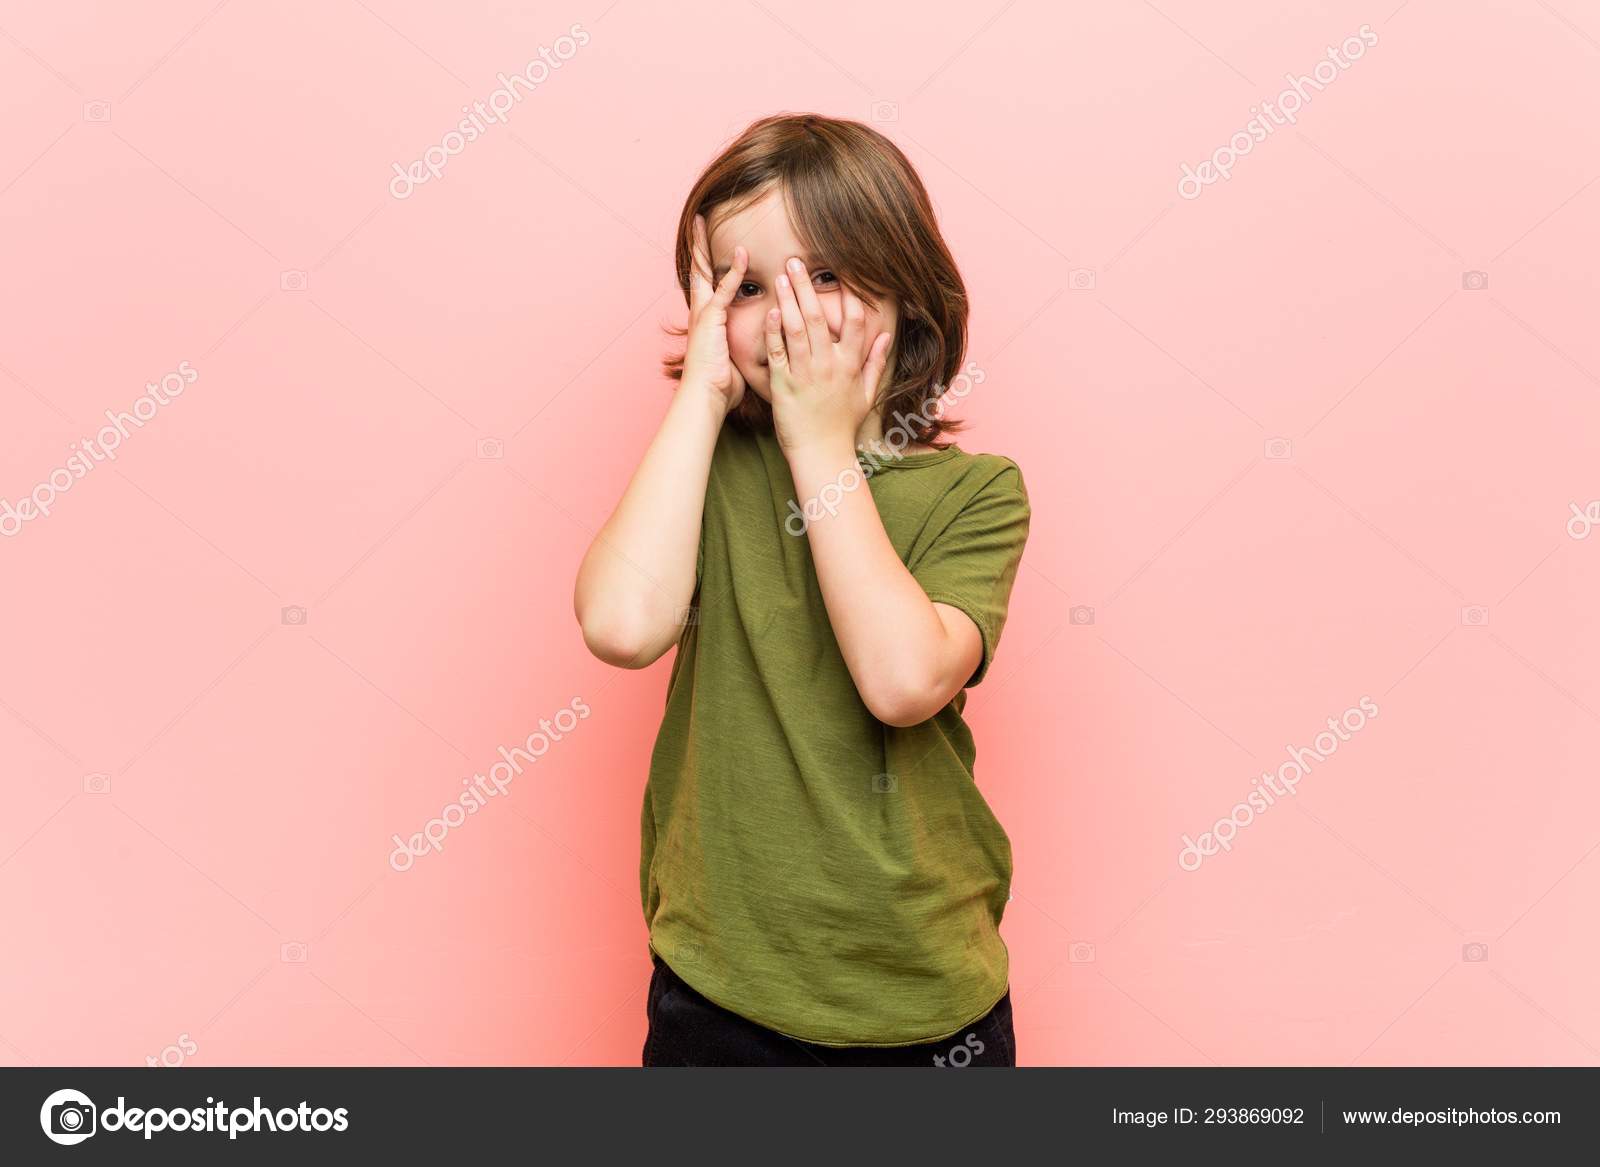 Little Boy Blink Fingers Frightened Nervous Royalty Free Photo Stock Image By C Asierromerocarballo